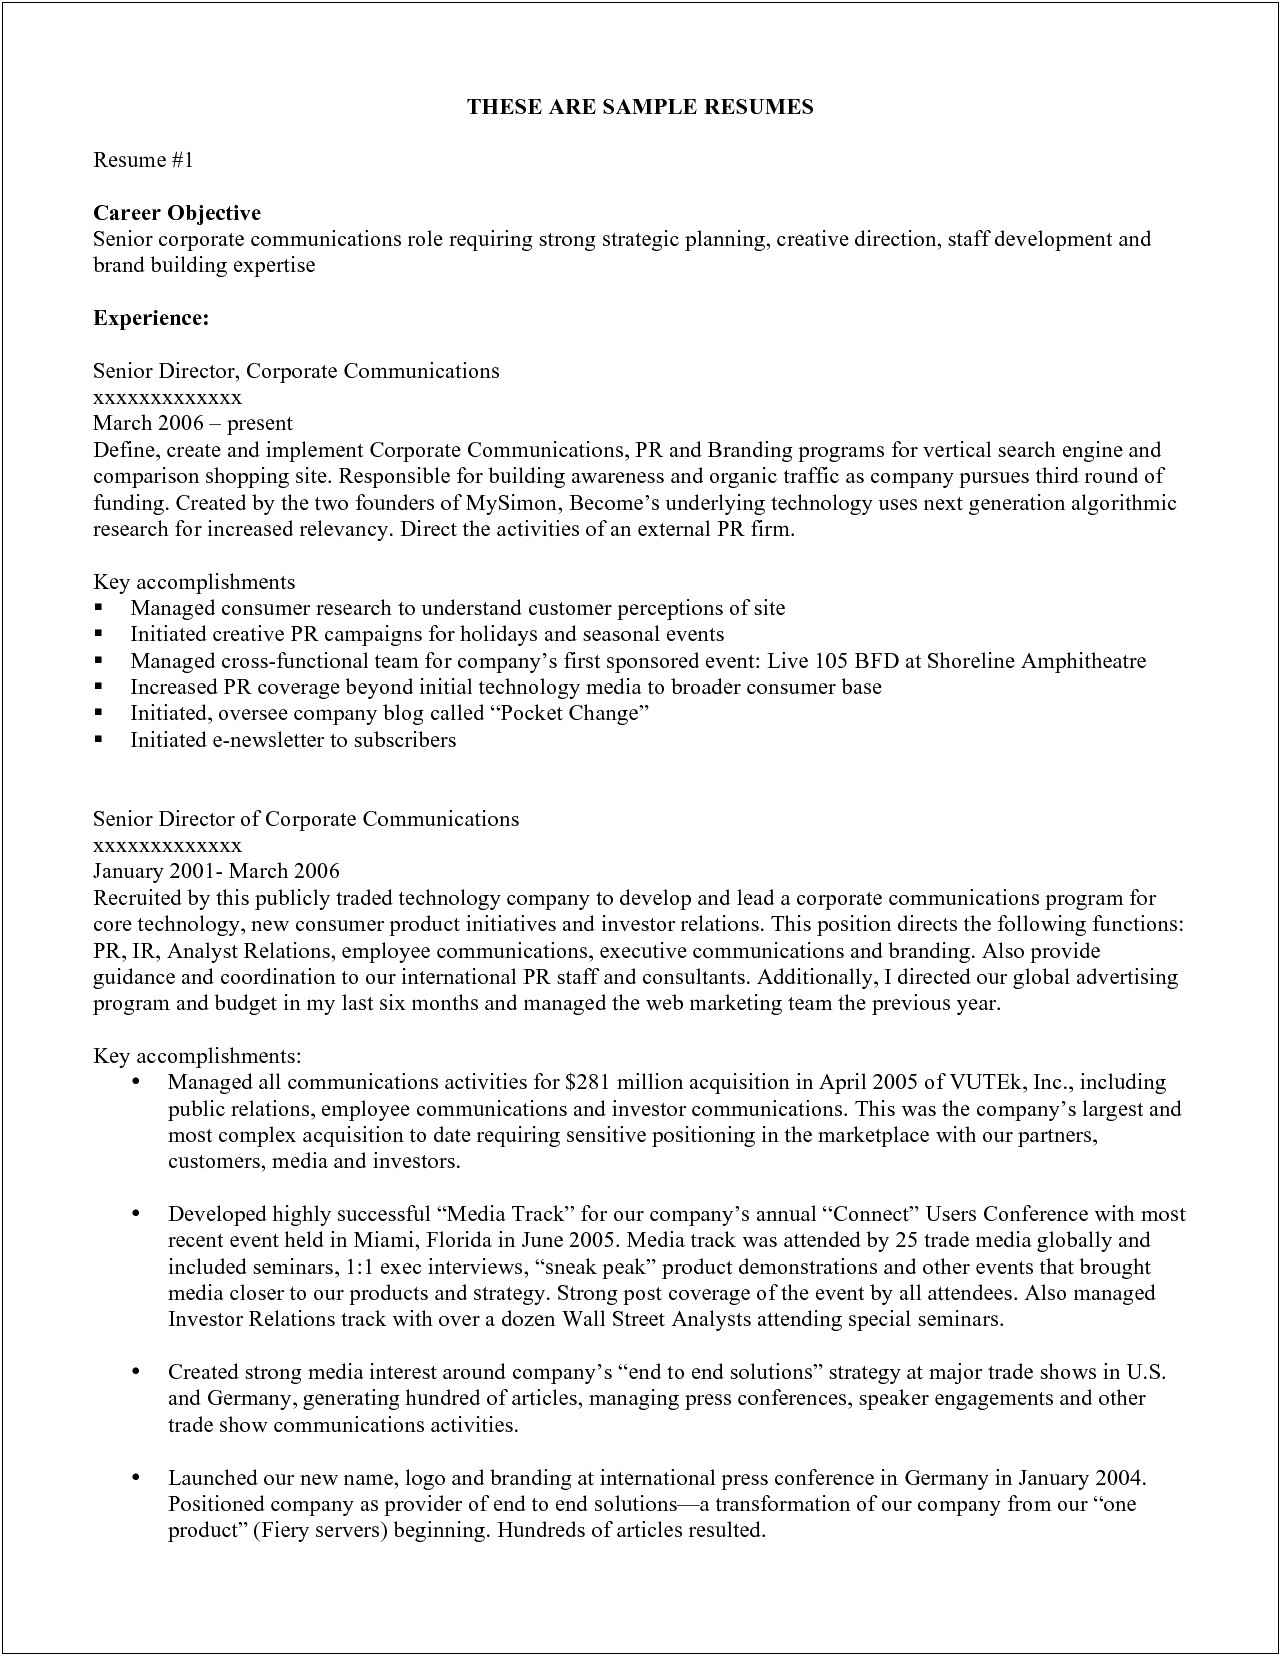 Help Writing A Resume Objective Statement